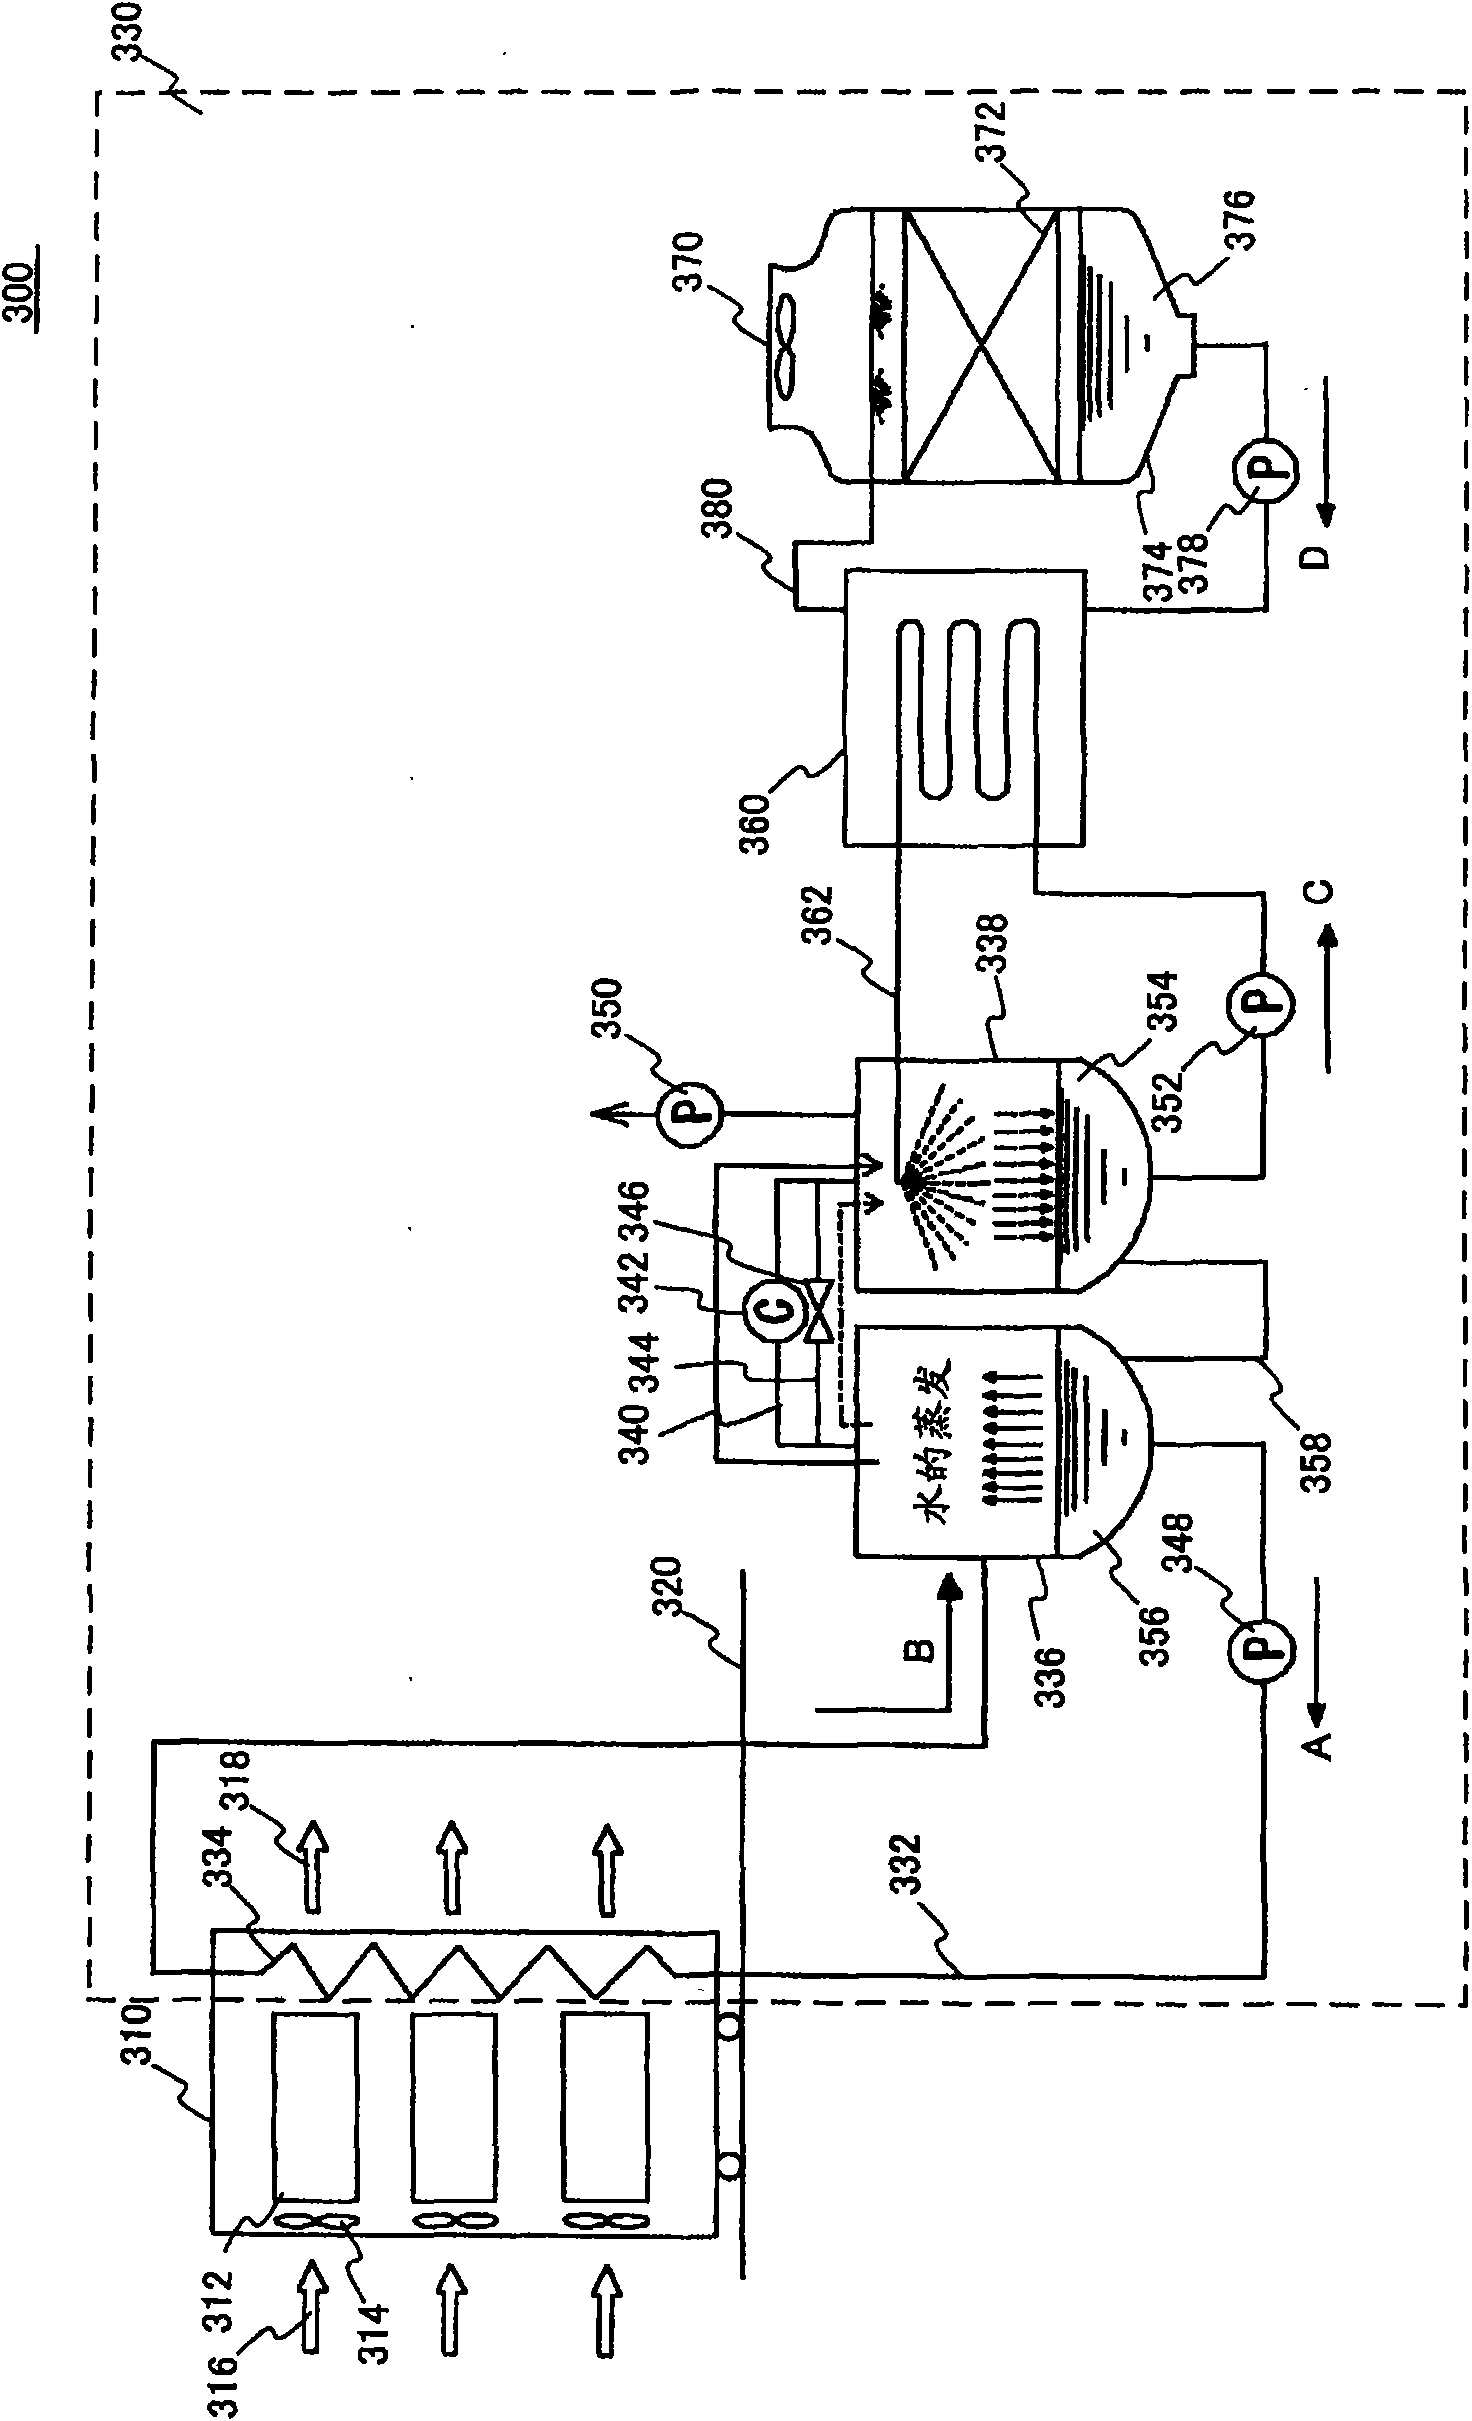 Device and method for promotion of cooling electronic device rack by using a vapor compression system